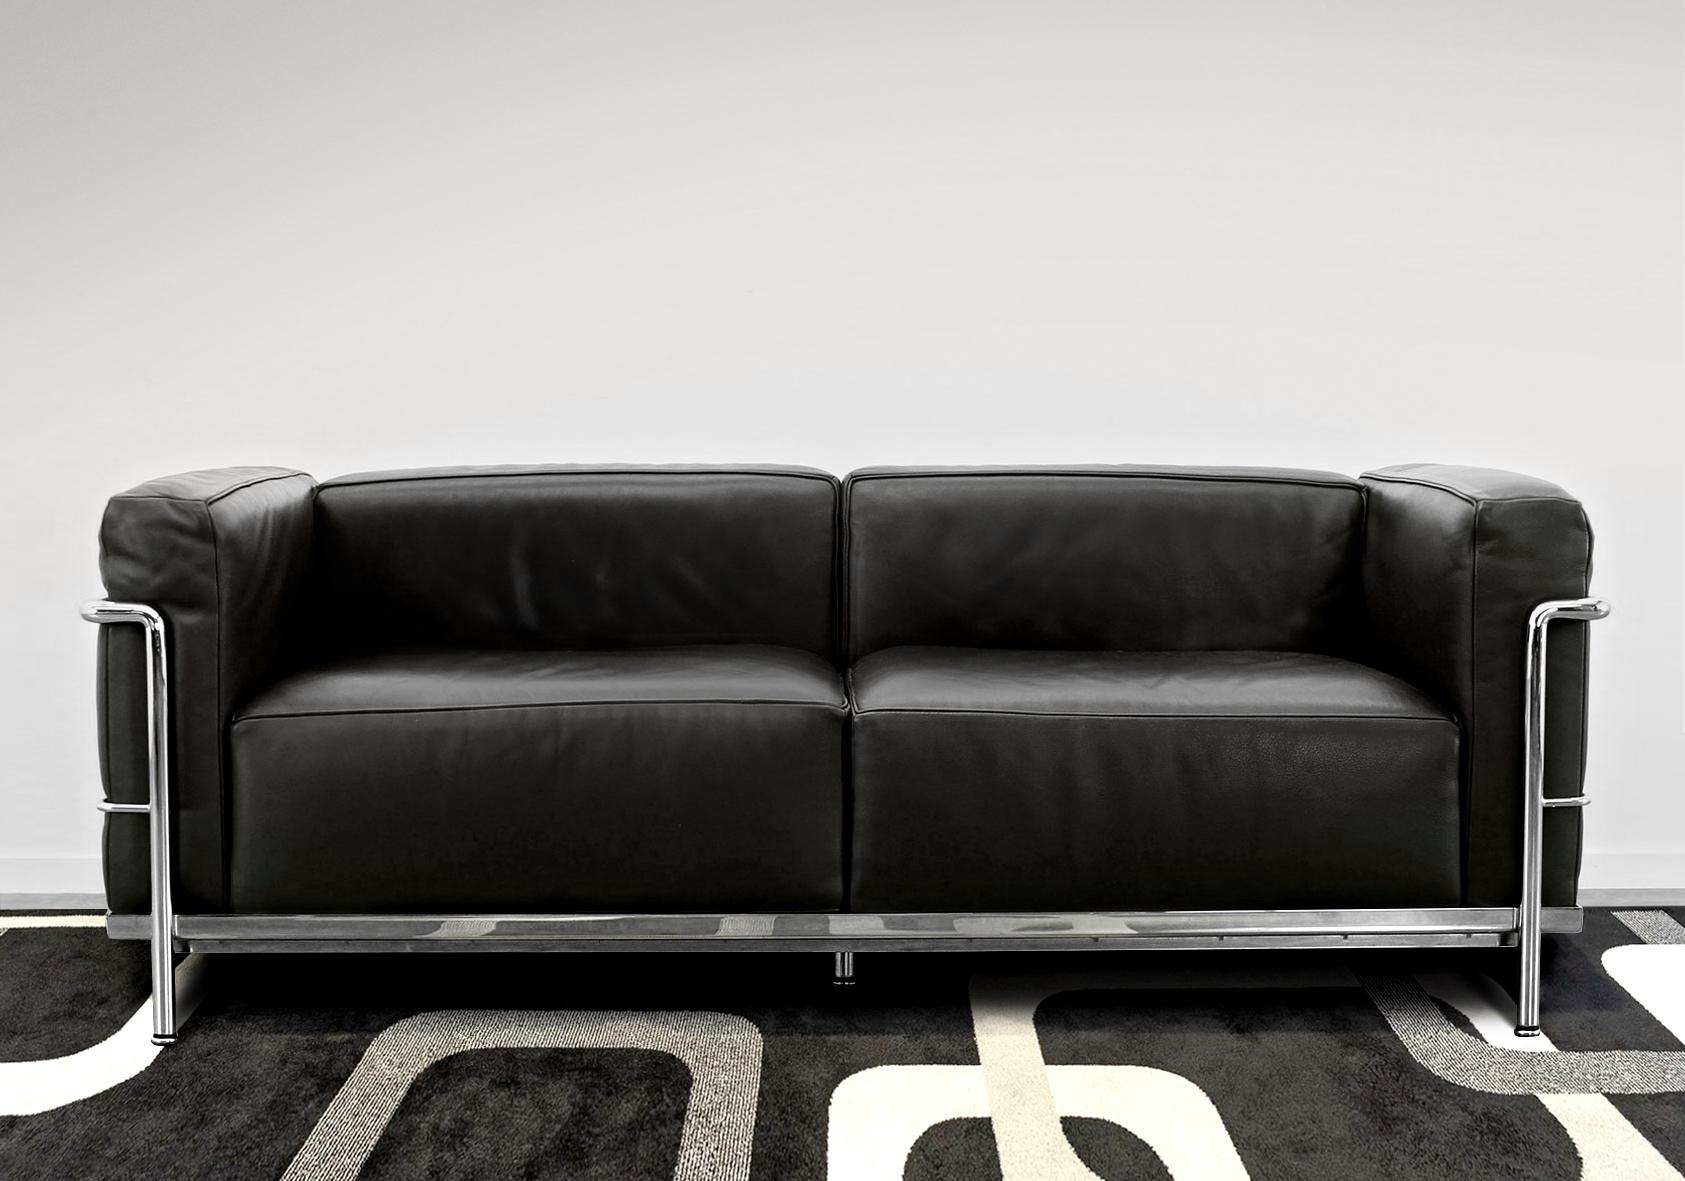 Authentic LC3 sofa, designed by Le Corbusier, Perriand and Jeanneret in 1928.
Cassina edition in black leather.
Engraved serial number and Cassina signature.

Very nice condition.

W 168 cm x D 73 cm x H 62 cm 

Retail price : 9924€ 
2 pieces